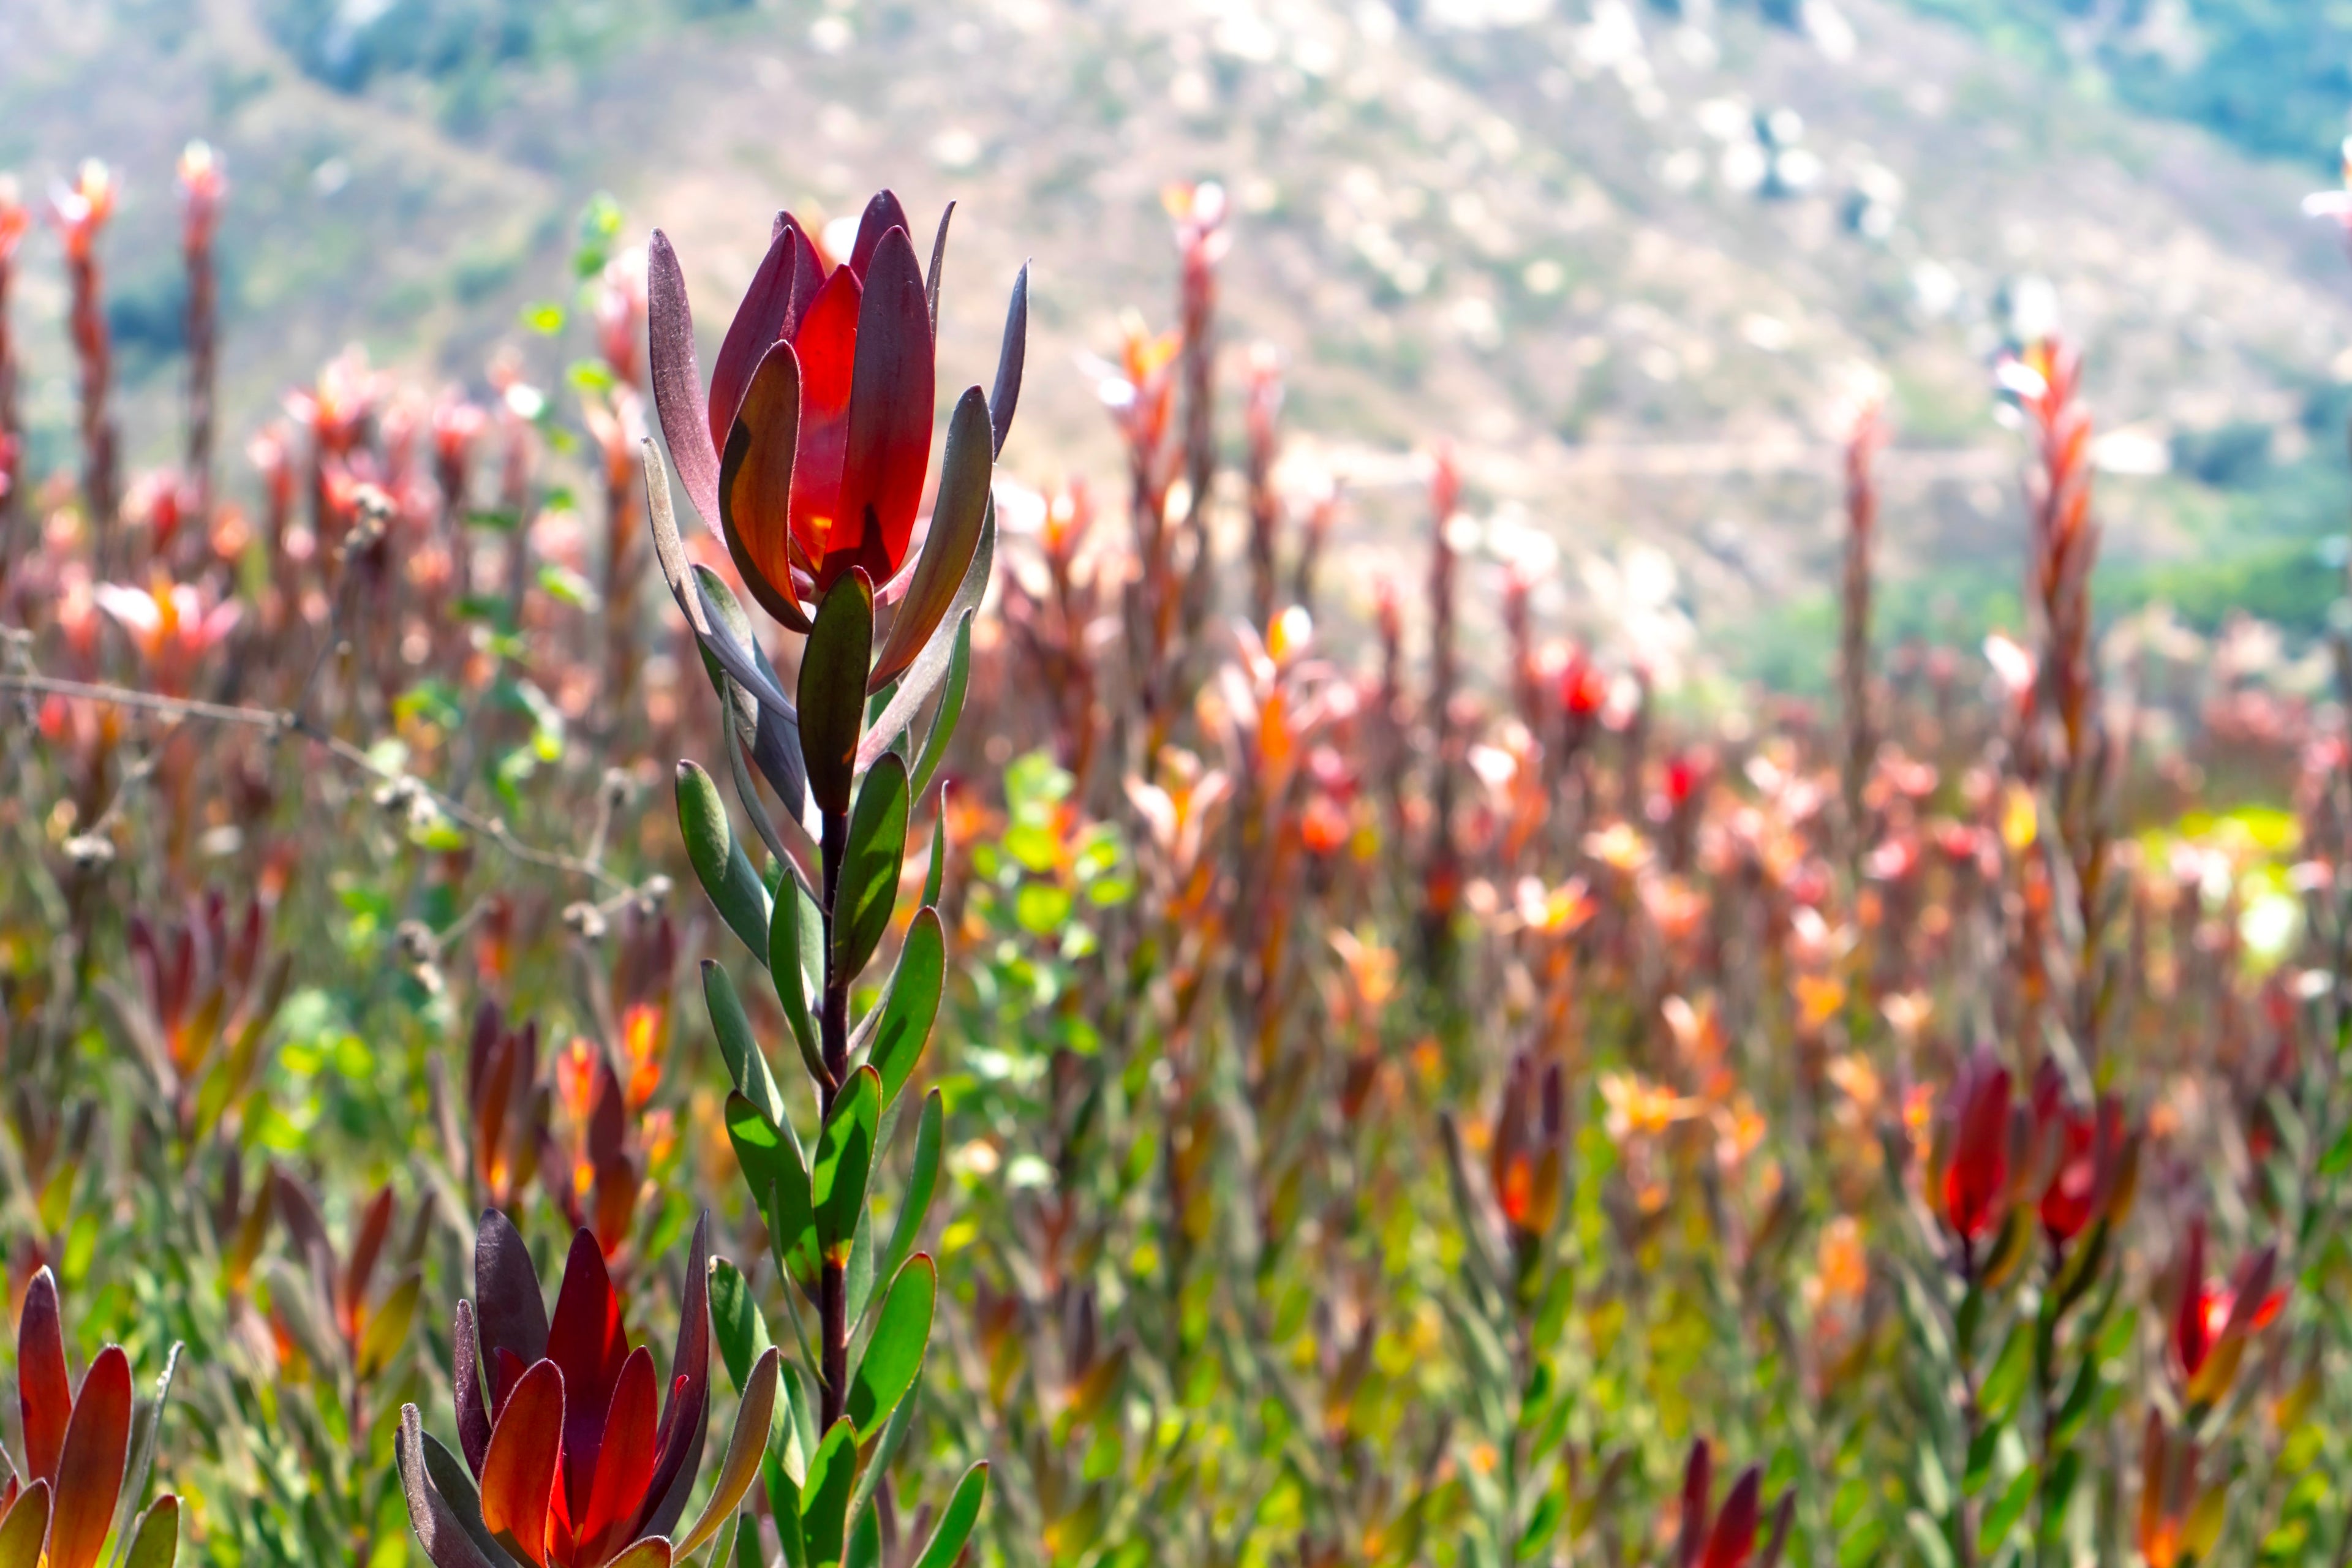 Safari Sunset is our top selling Leucadendron - famously sought after for its vibrant red, yellow and green hues.